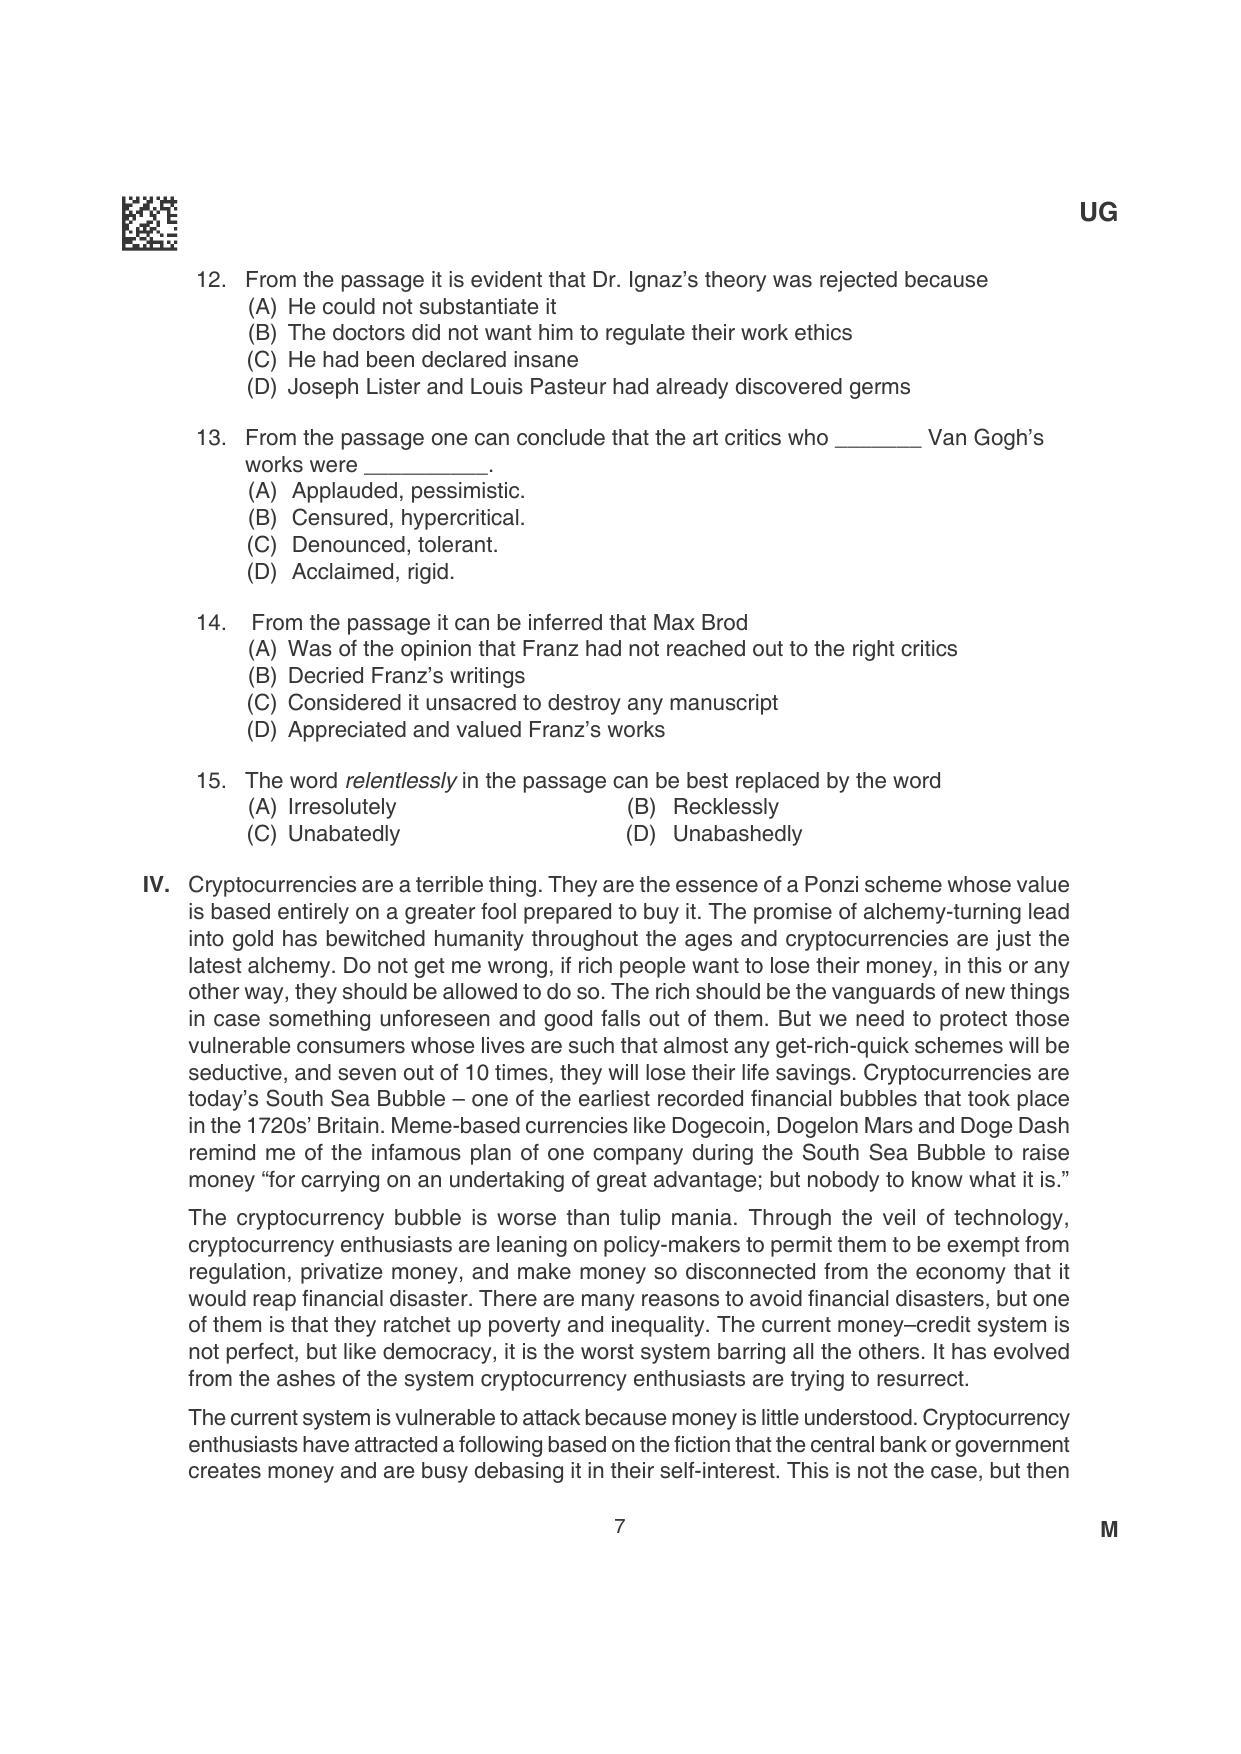 CLAT 2022 UG Question Papers - Page 7